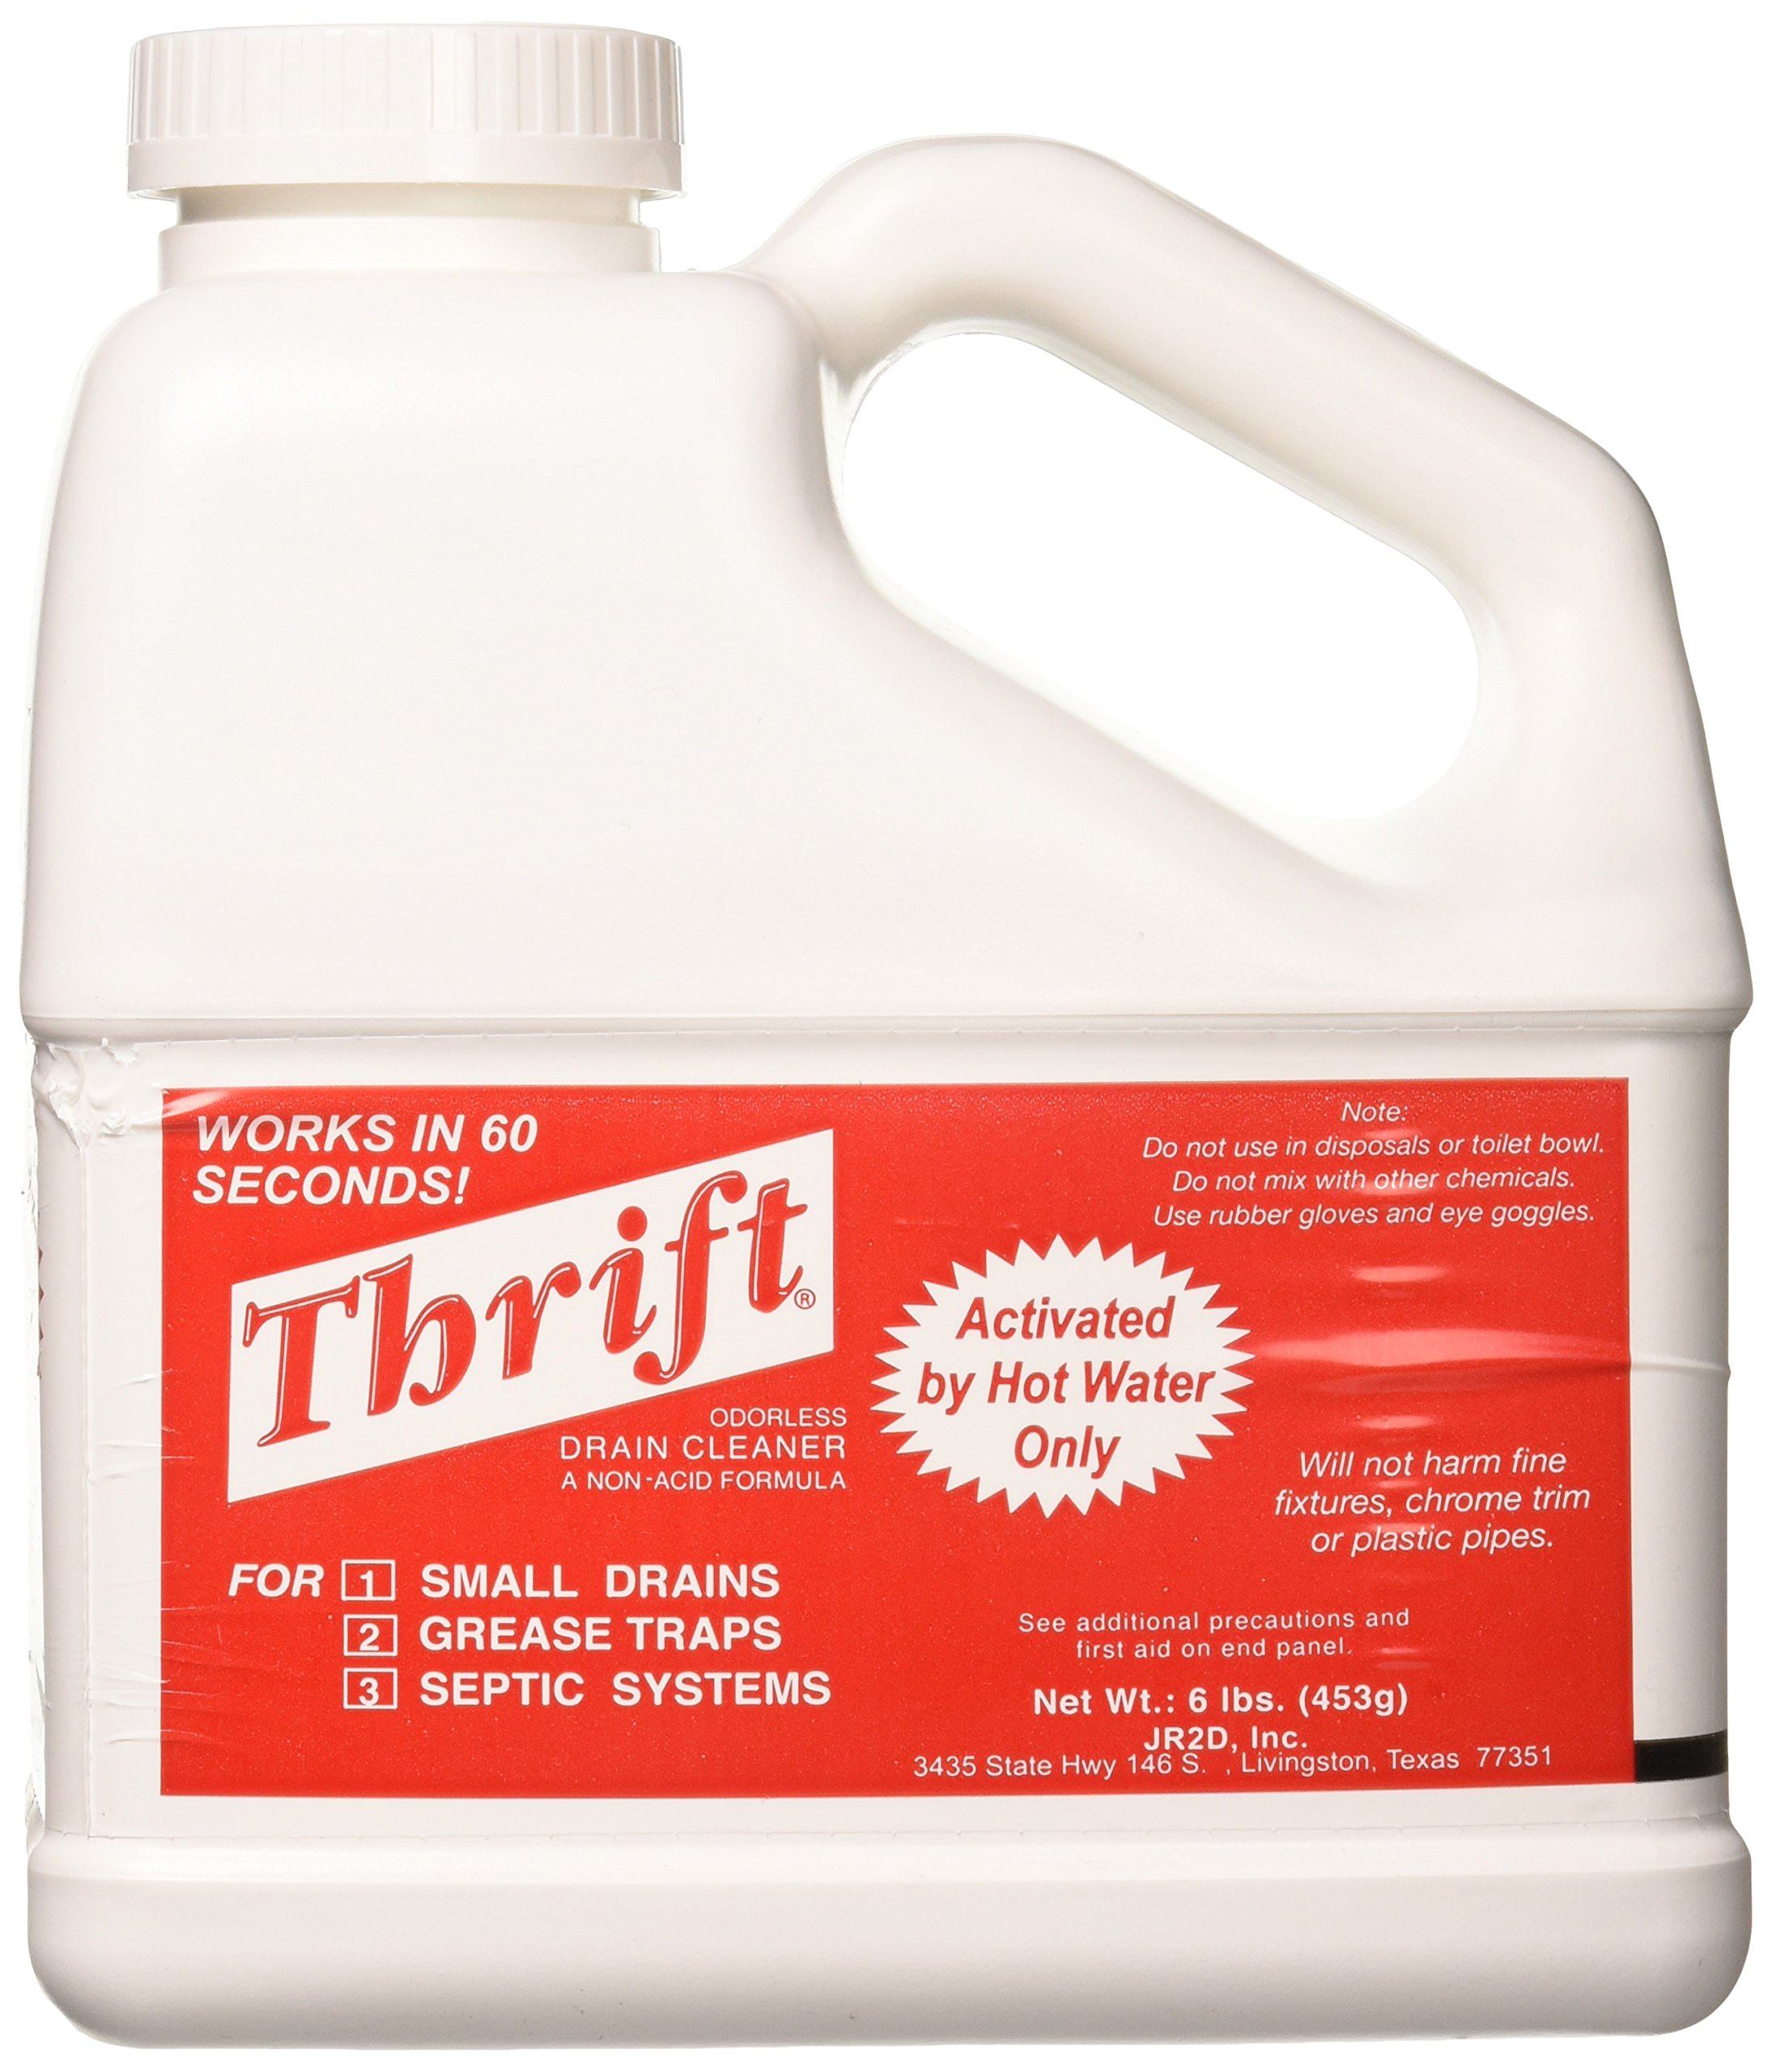 where can i buy thrift drain cleaner